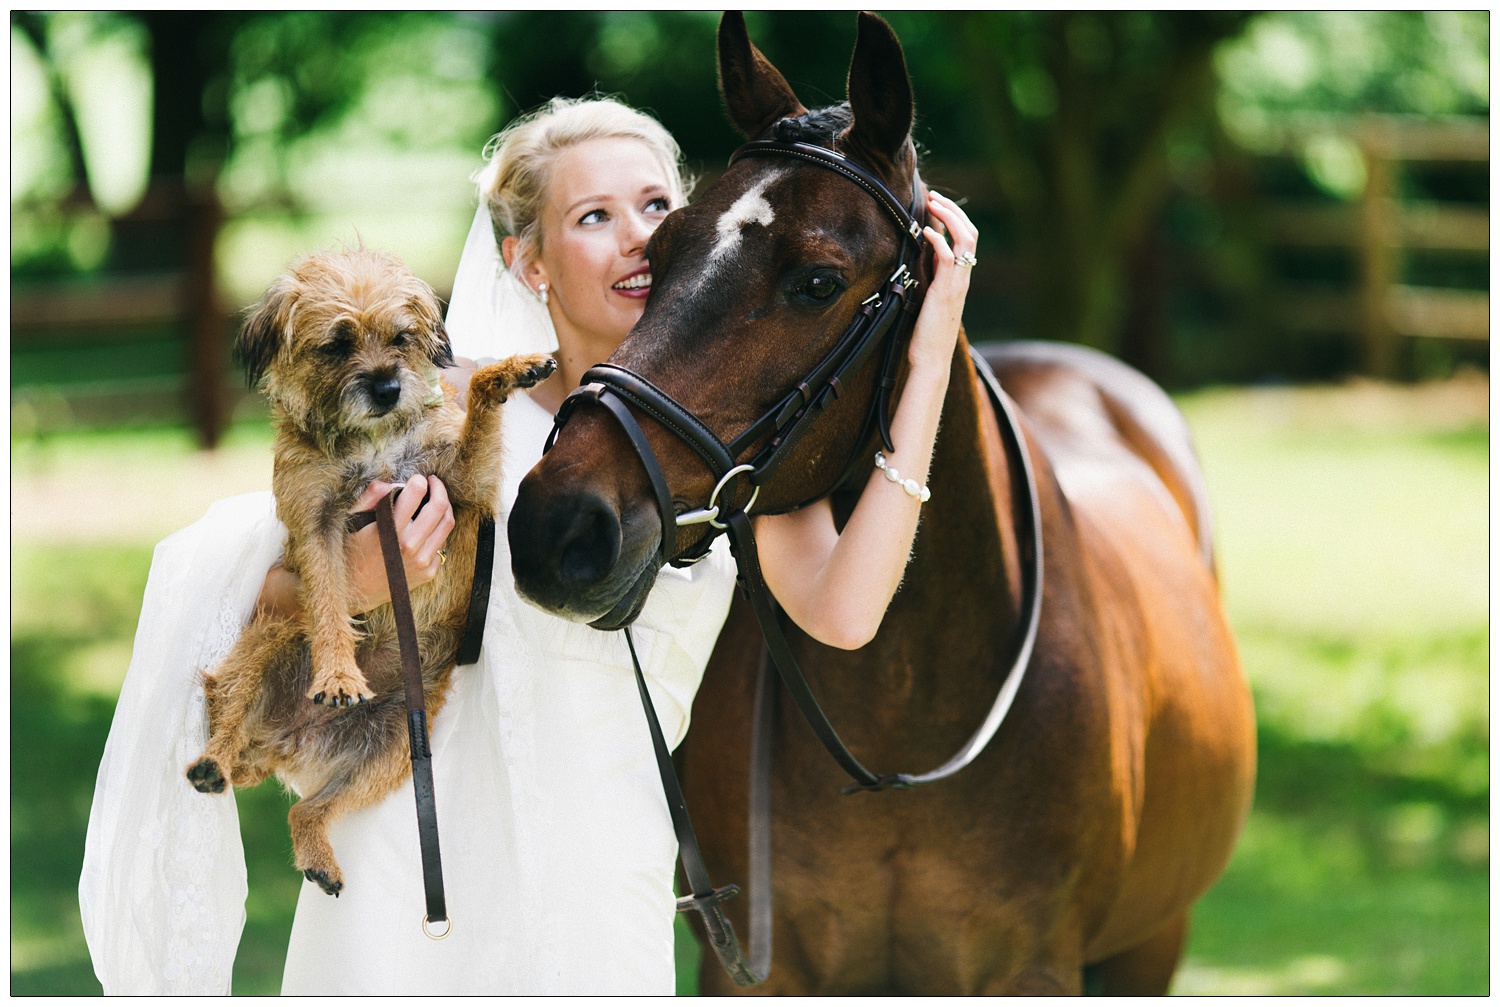 The bride holds her dog while hugging her horse.